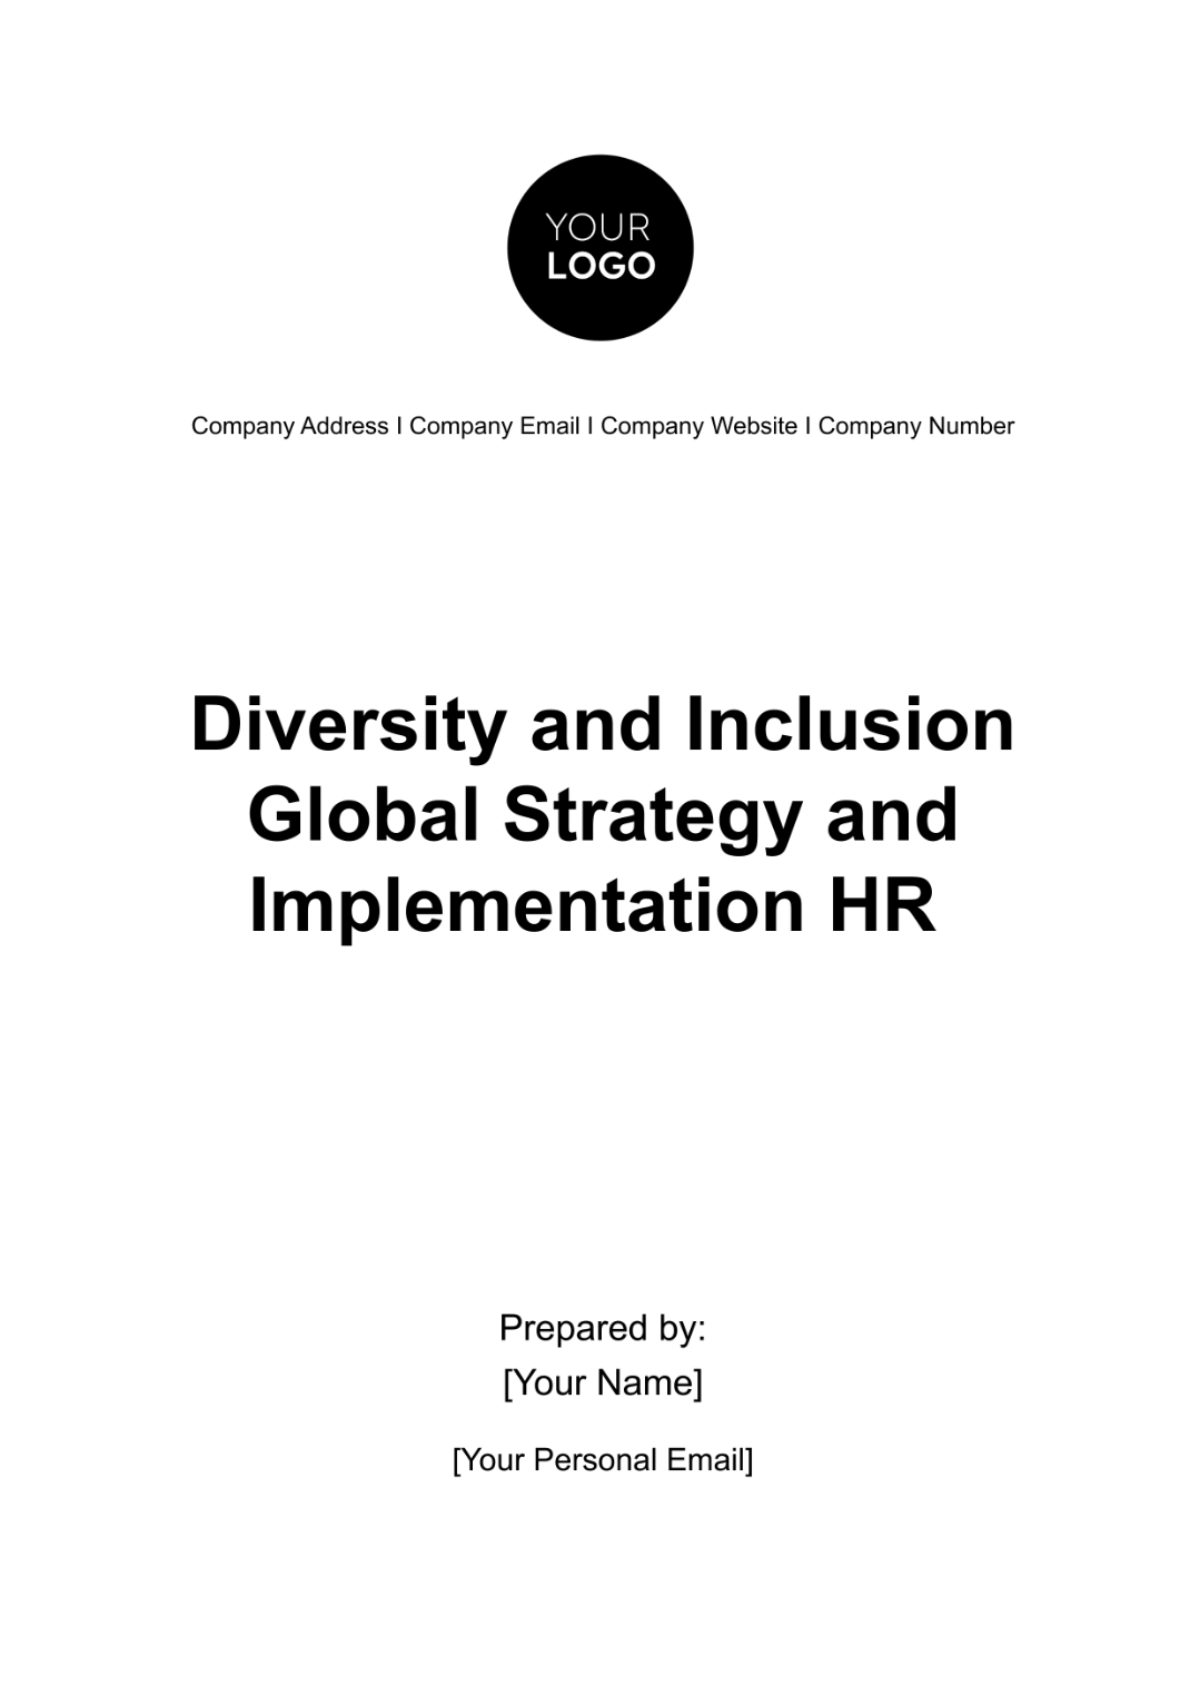 Diversity and Inclusion Global Strategy and Implementation HR Template